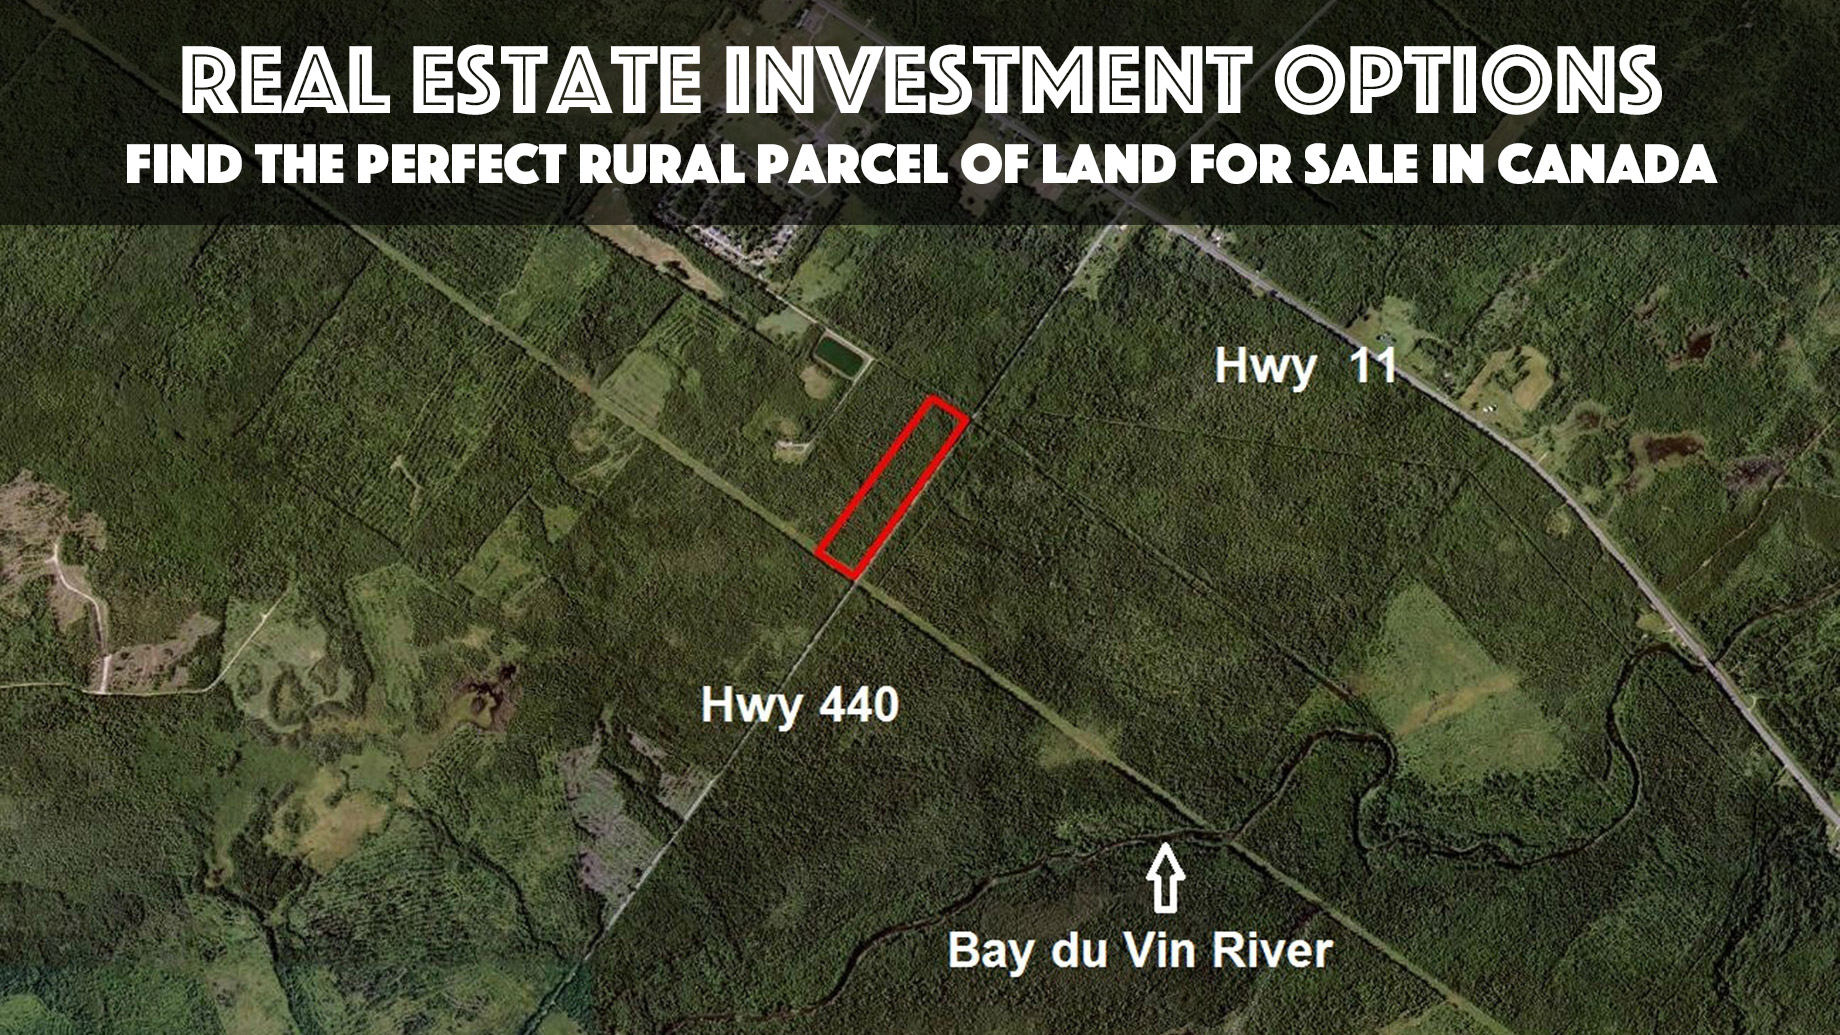 Real Estate Investment Options - Find the Perfect Rural Parcel of Land for Sale in Canada